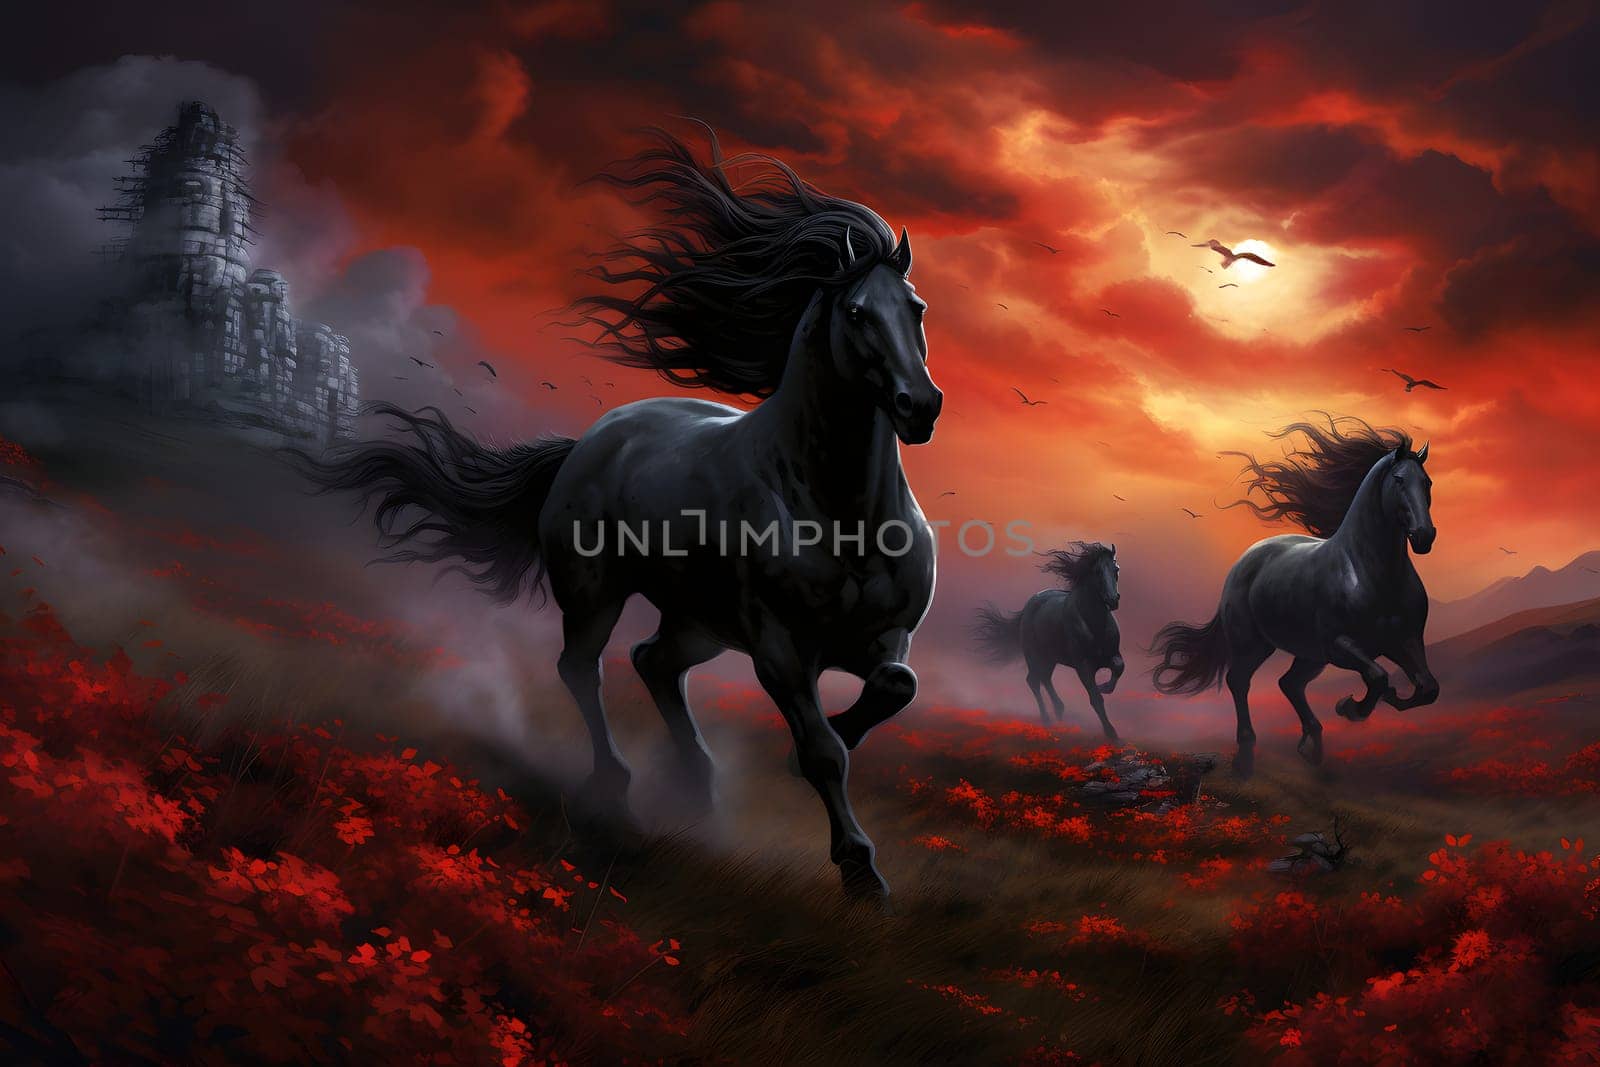 Dark horses running in a gloomy red field of flowers, in front of castle with dramatic clouds in sunset sky. Neural network generated image. Not based on any actual person, scene or pattern.